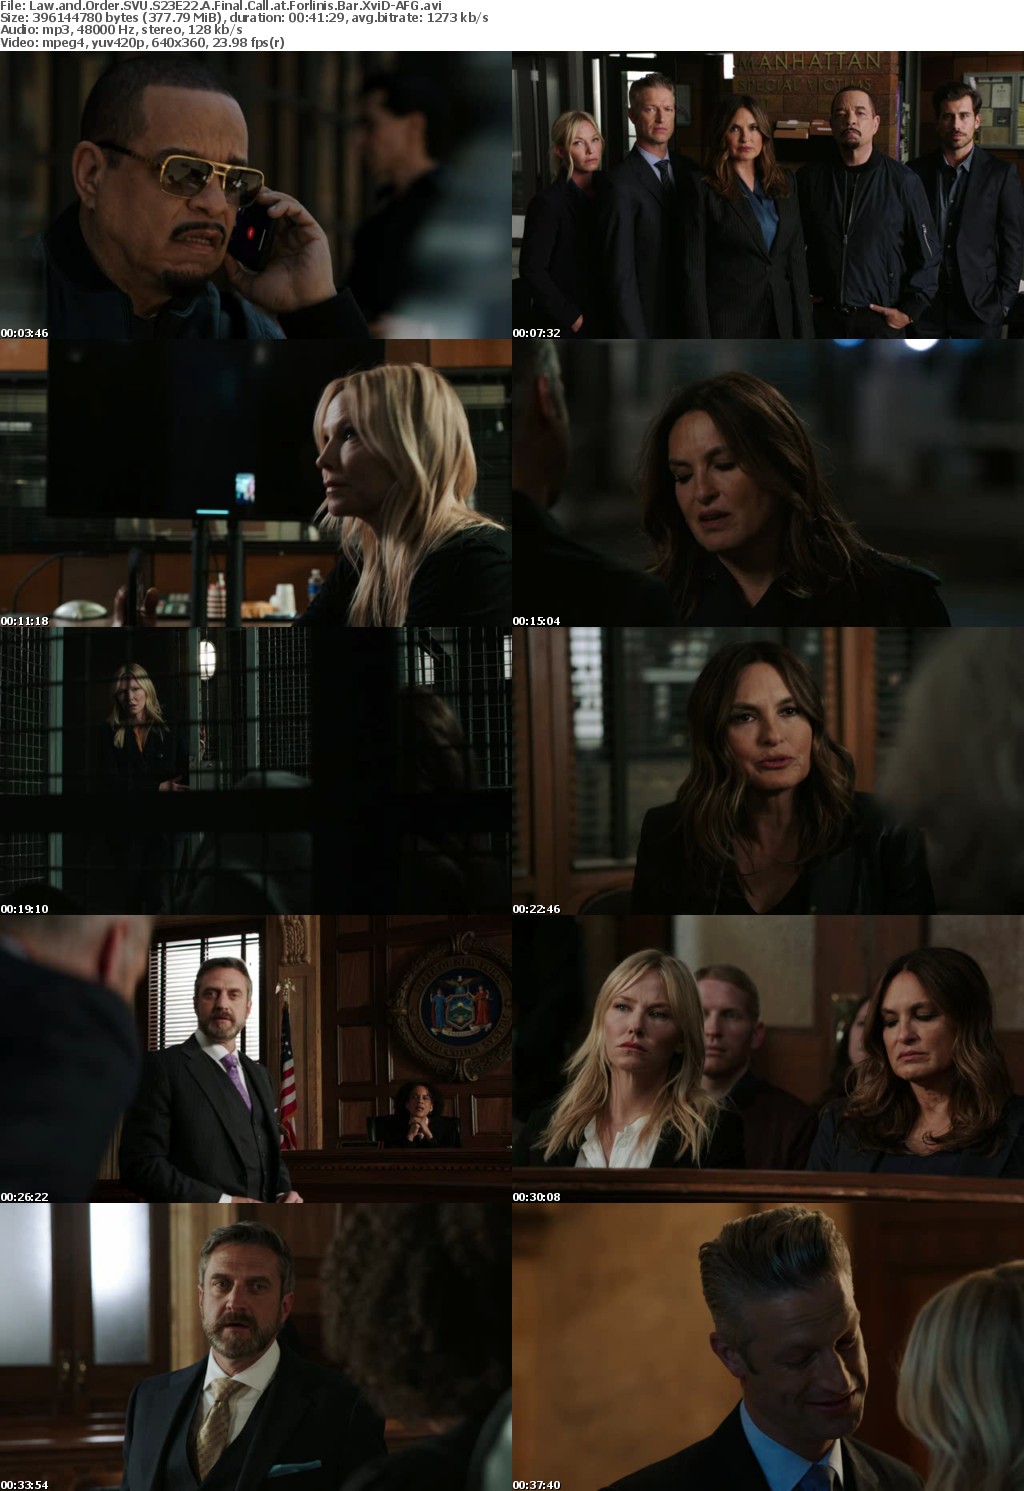 Law and Order SVU S23E22 A Final Call at Forlinis Bar XviD-AFG